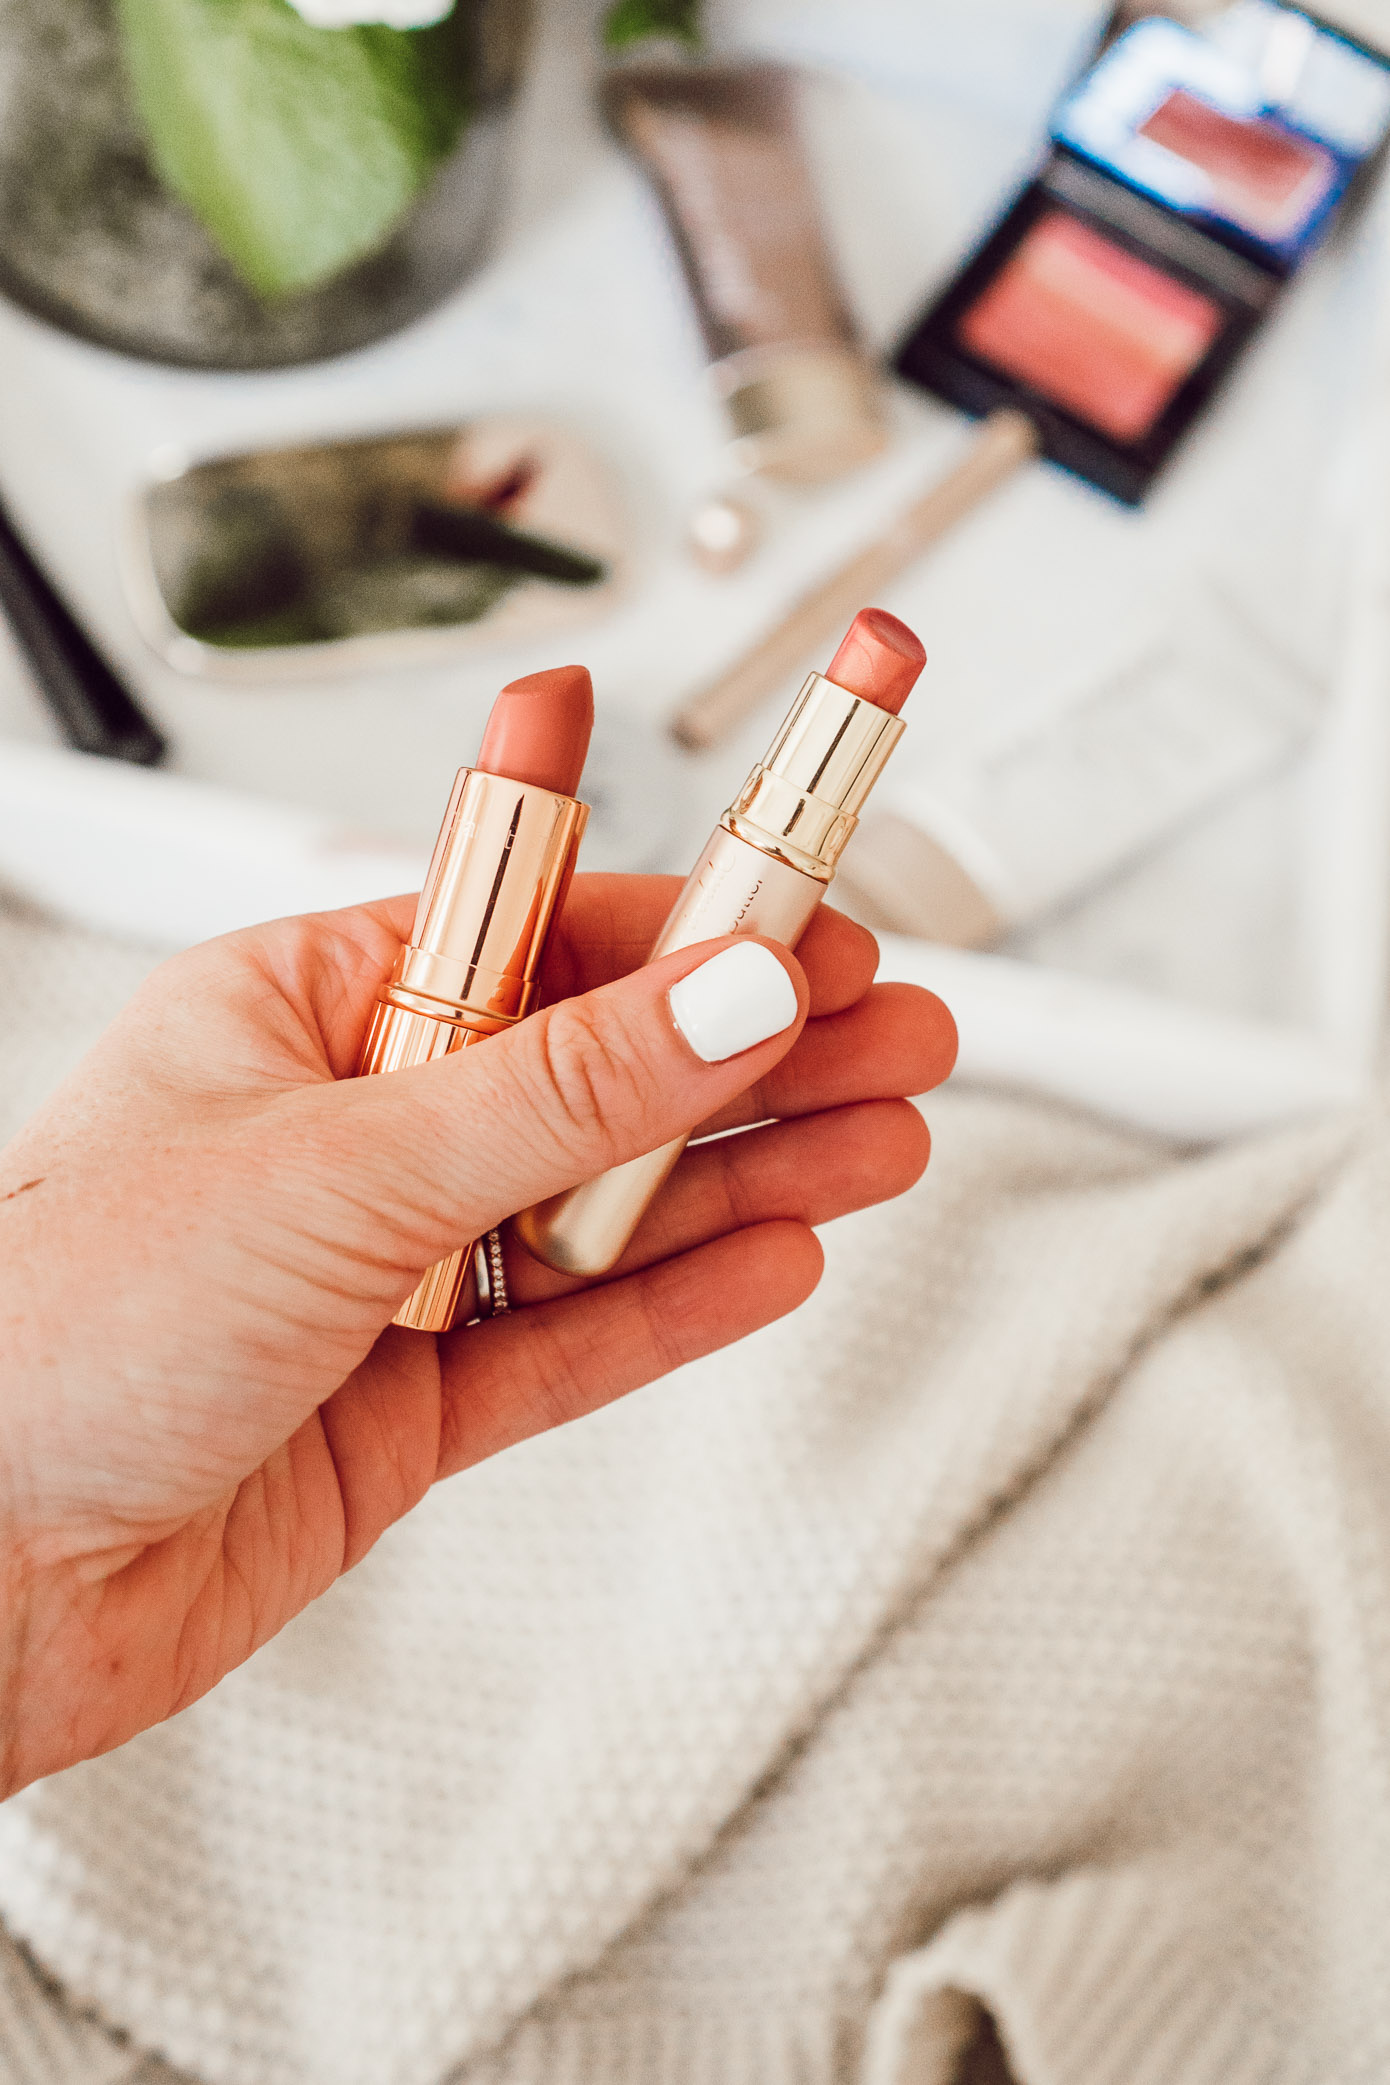 Summer Everyday Makeup | The Perfect Nude Lipstick for Summer 2018 | Louella Reese Life & Style Blog #summermakeup #everydaymakeup